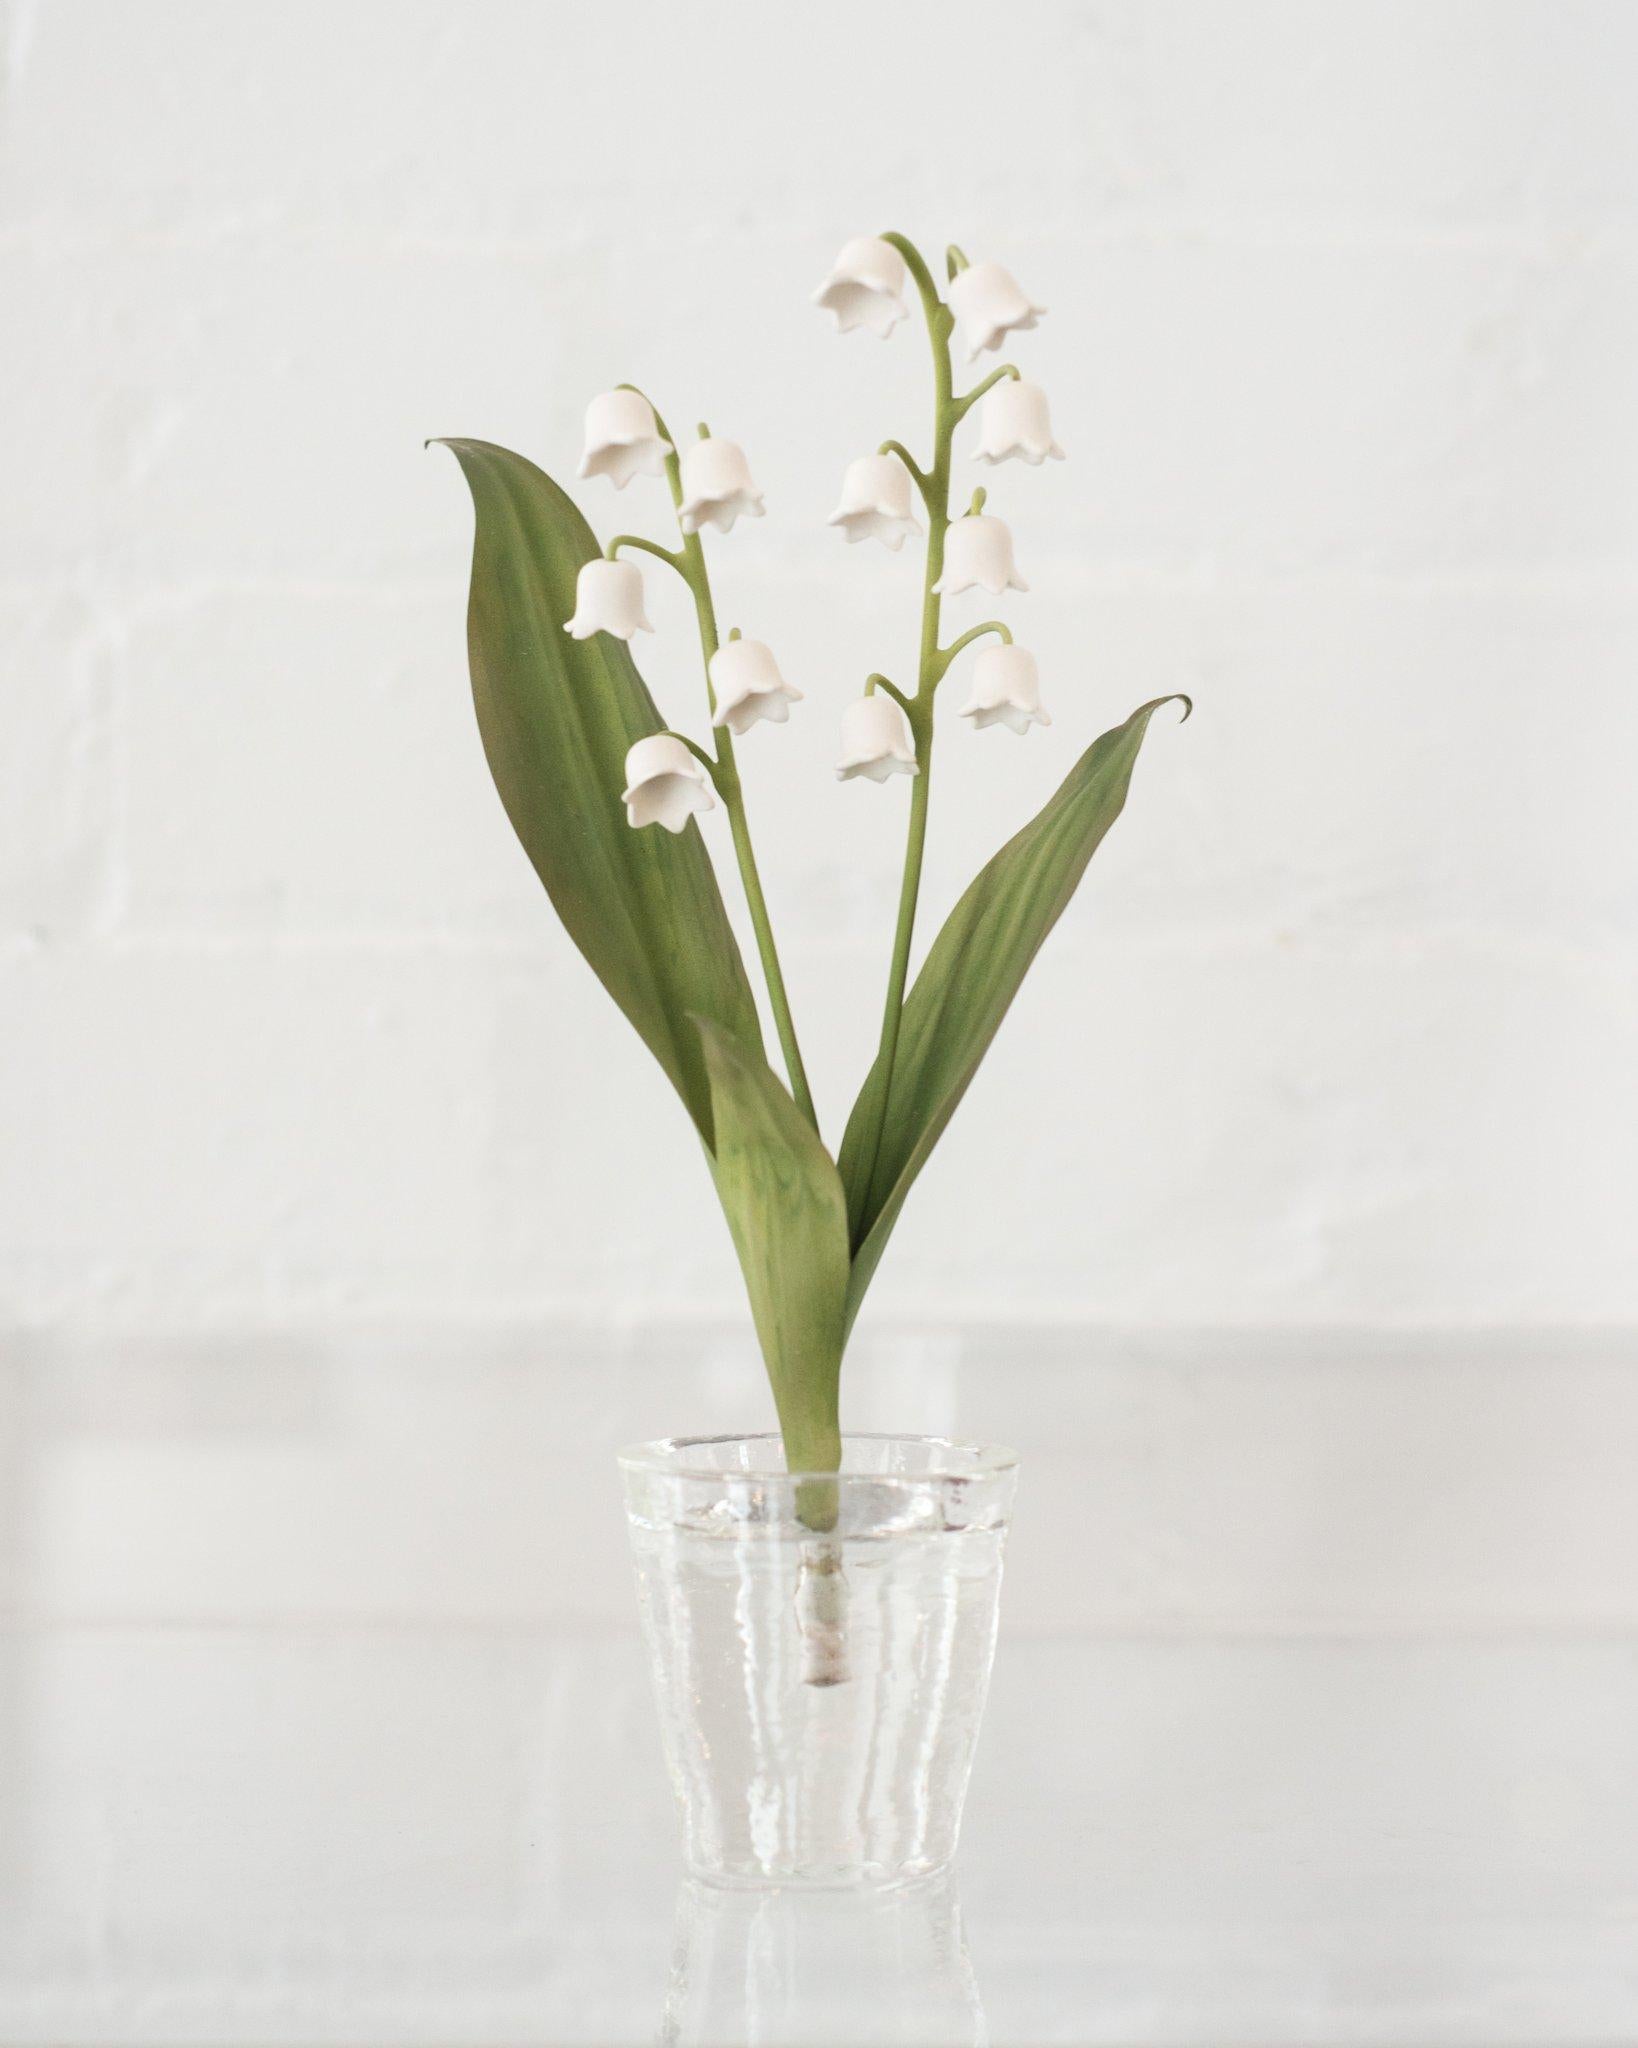 Enhance your table with these delicate porcelain flowers by French artist Samuel Mazy, exclusive to Maison Nurita in Canada. Mazy has been working as a ceramist for nearly 20 years in Paris. He sculpts porcelain flowers to create poetic floral